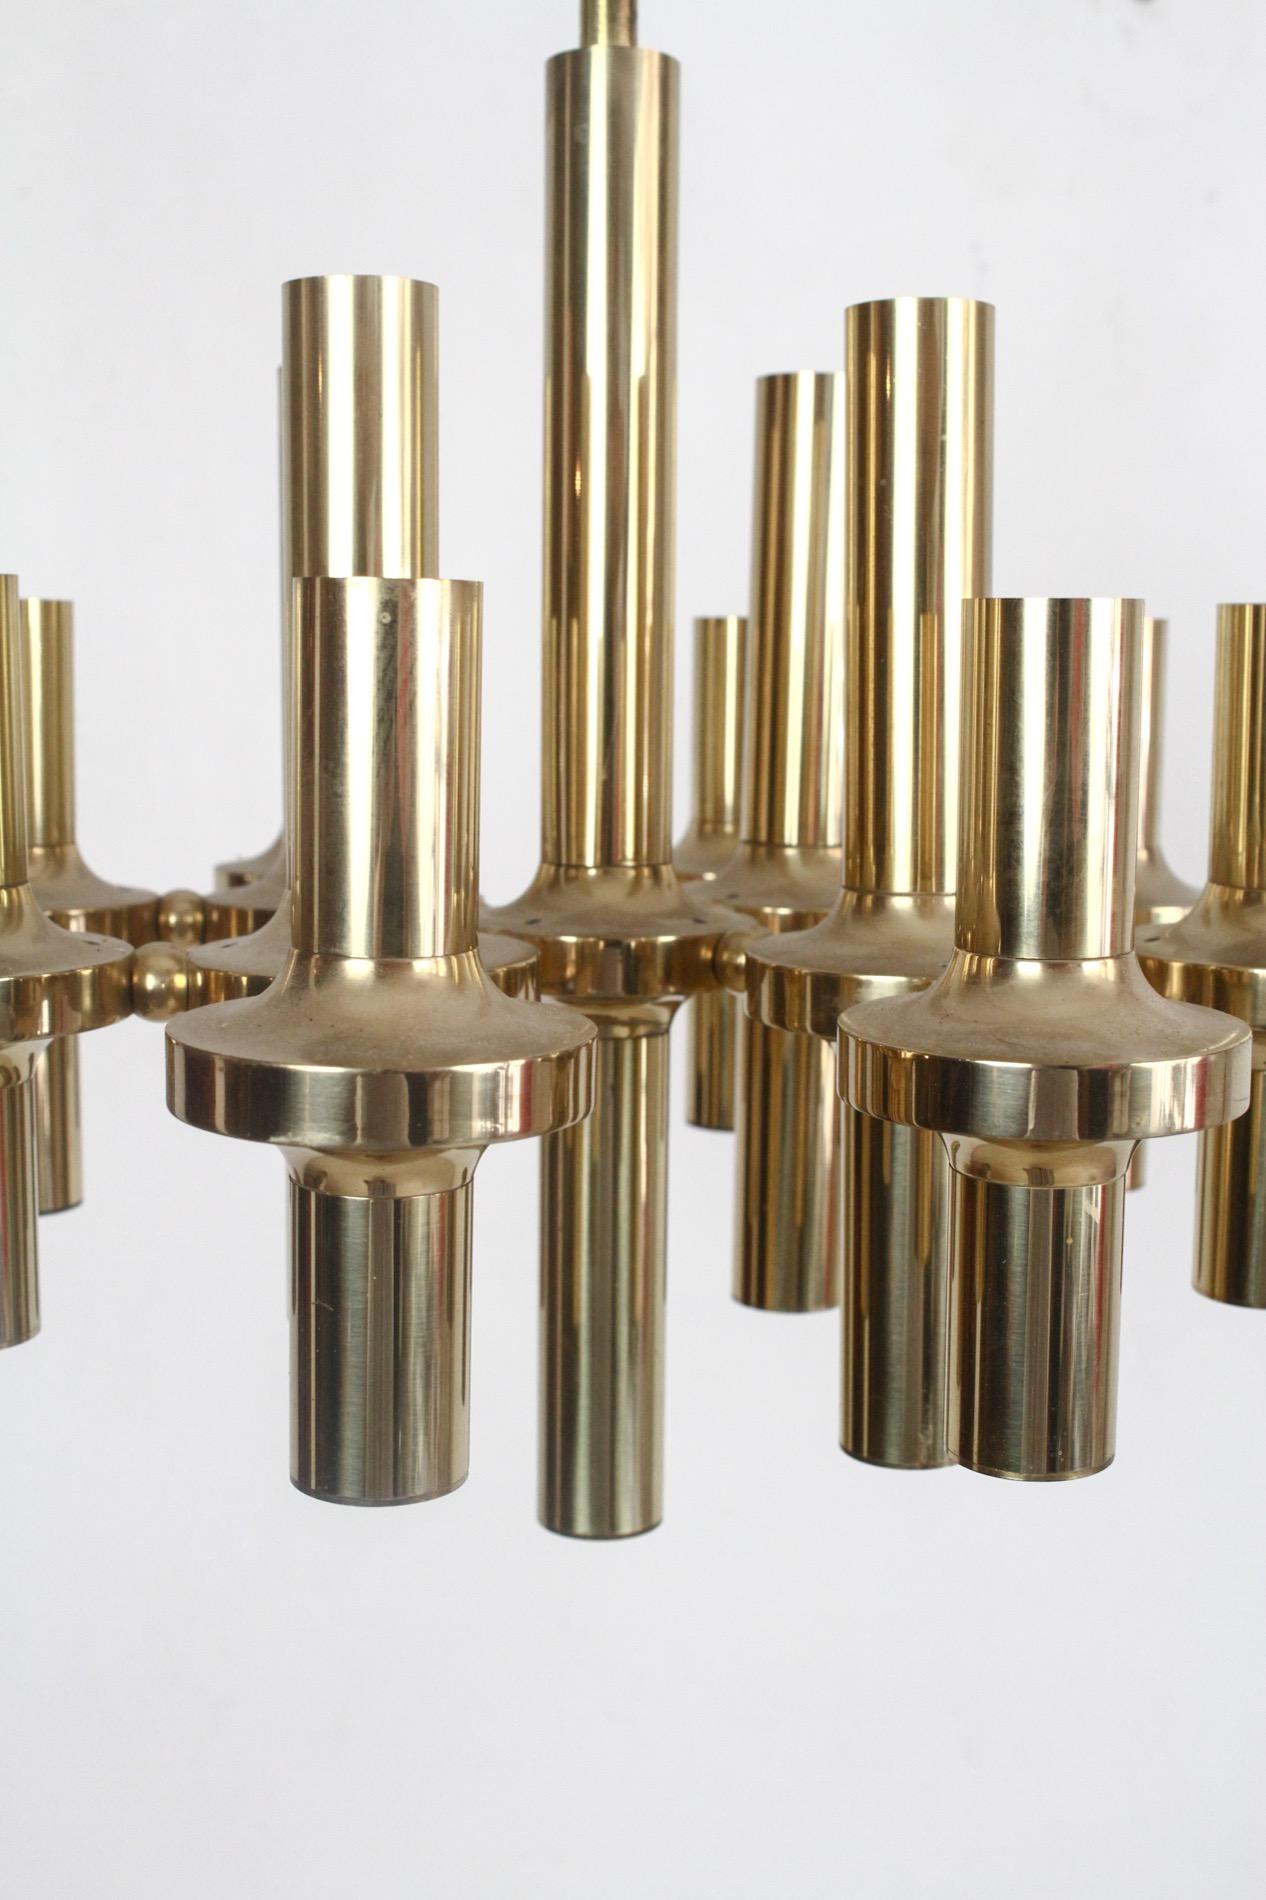 1970s modernist brass chandelier by the Italian lighting designer Gaetano Sciolari. It features 12 pieces of E14 sockets. Your choice of bulbs will create different looks; brass tipped round bulbs or tubular bulbs will compliment the fixture nicely.